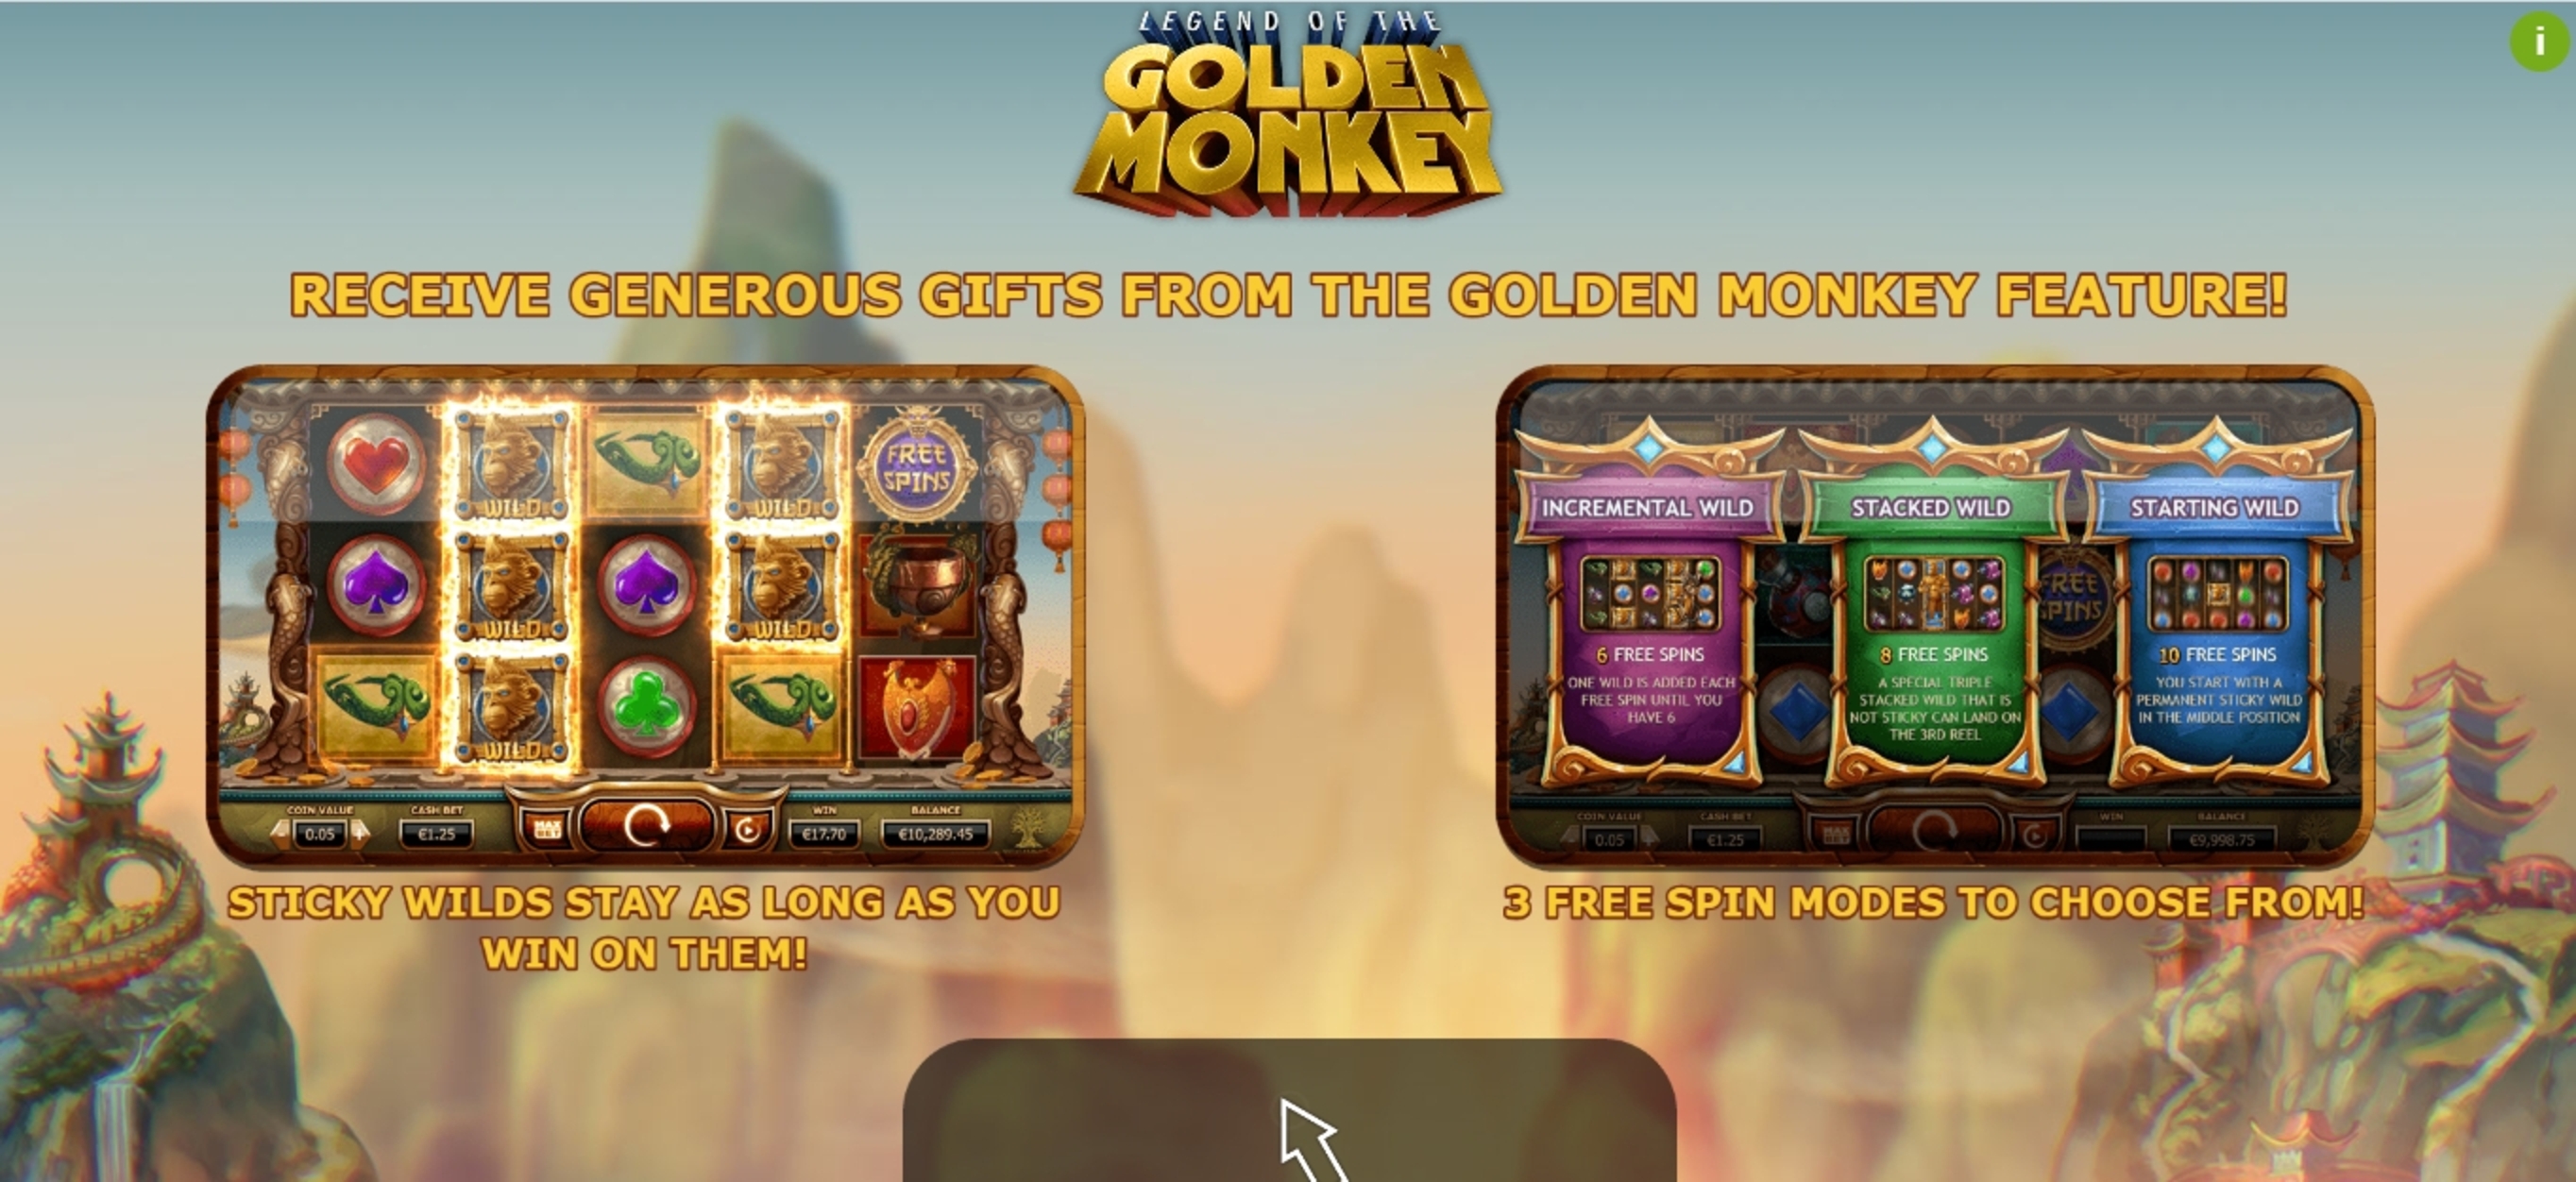 Play Legend of the Golden Monkey Free Casino Slot Game by Yggdrasil Gaming